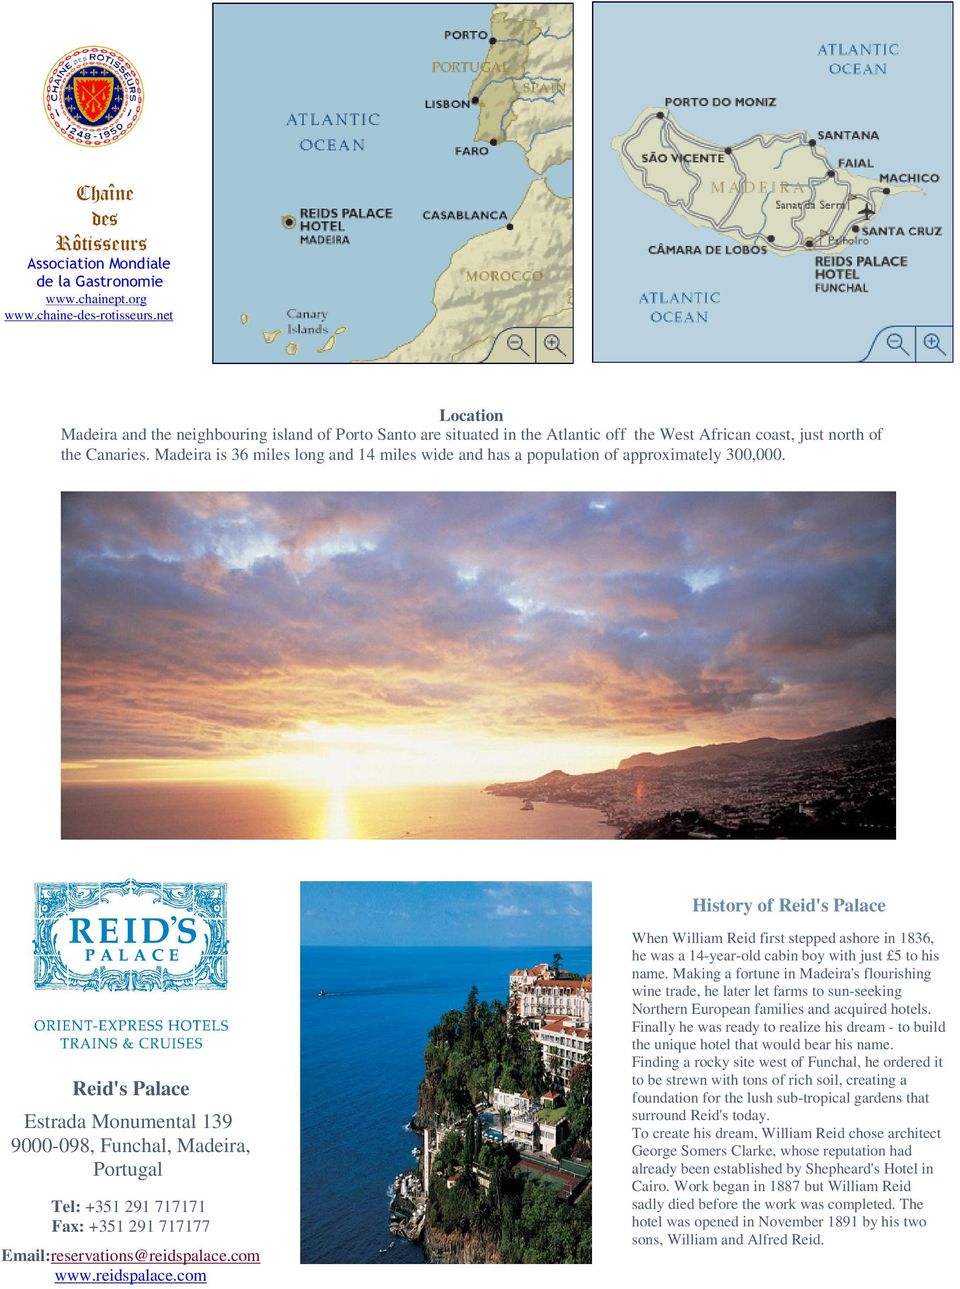 Madeira is 36 miles long and 14 miles wide and has a population of approximately 300,000.